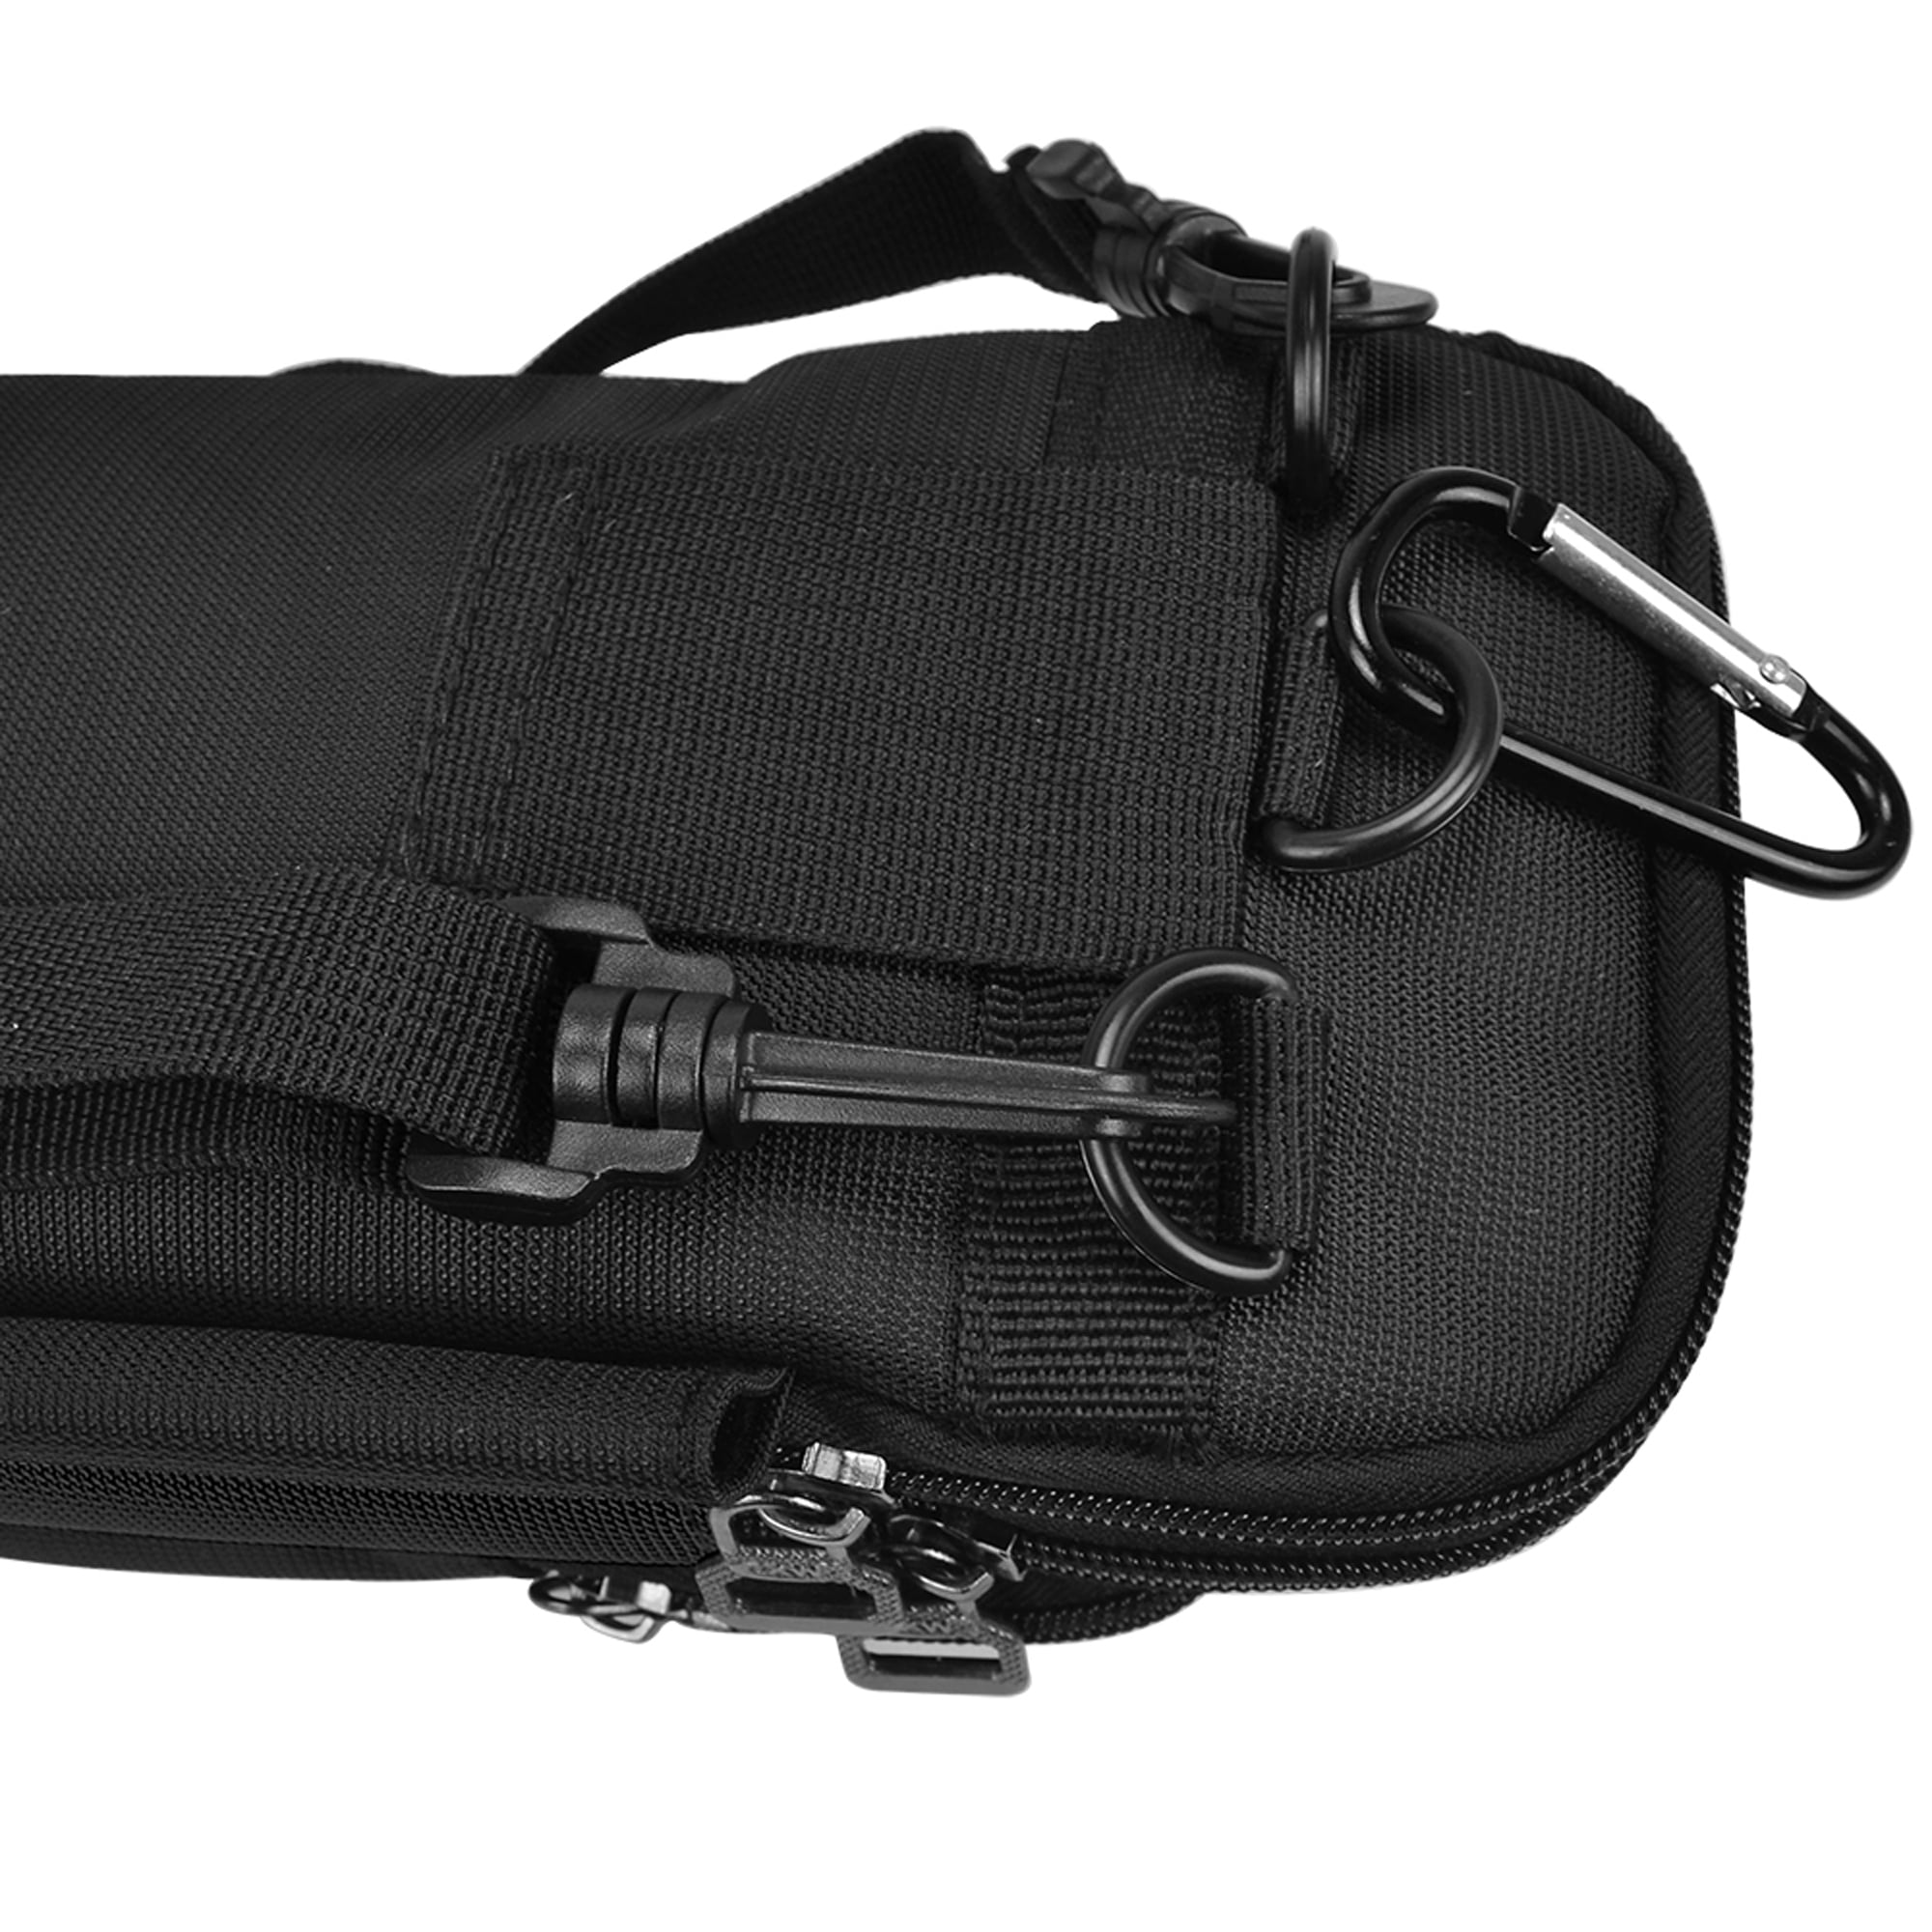 Velco Carabiner Strap Clip – Lieber's Luggage